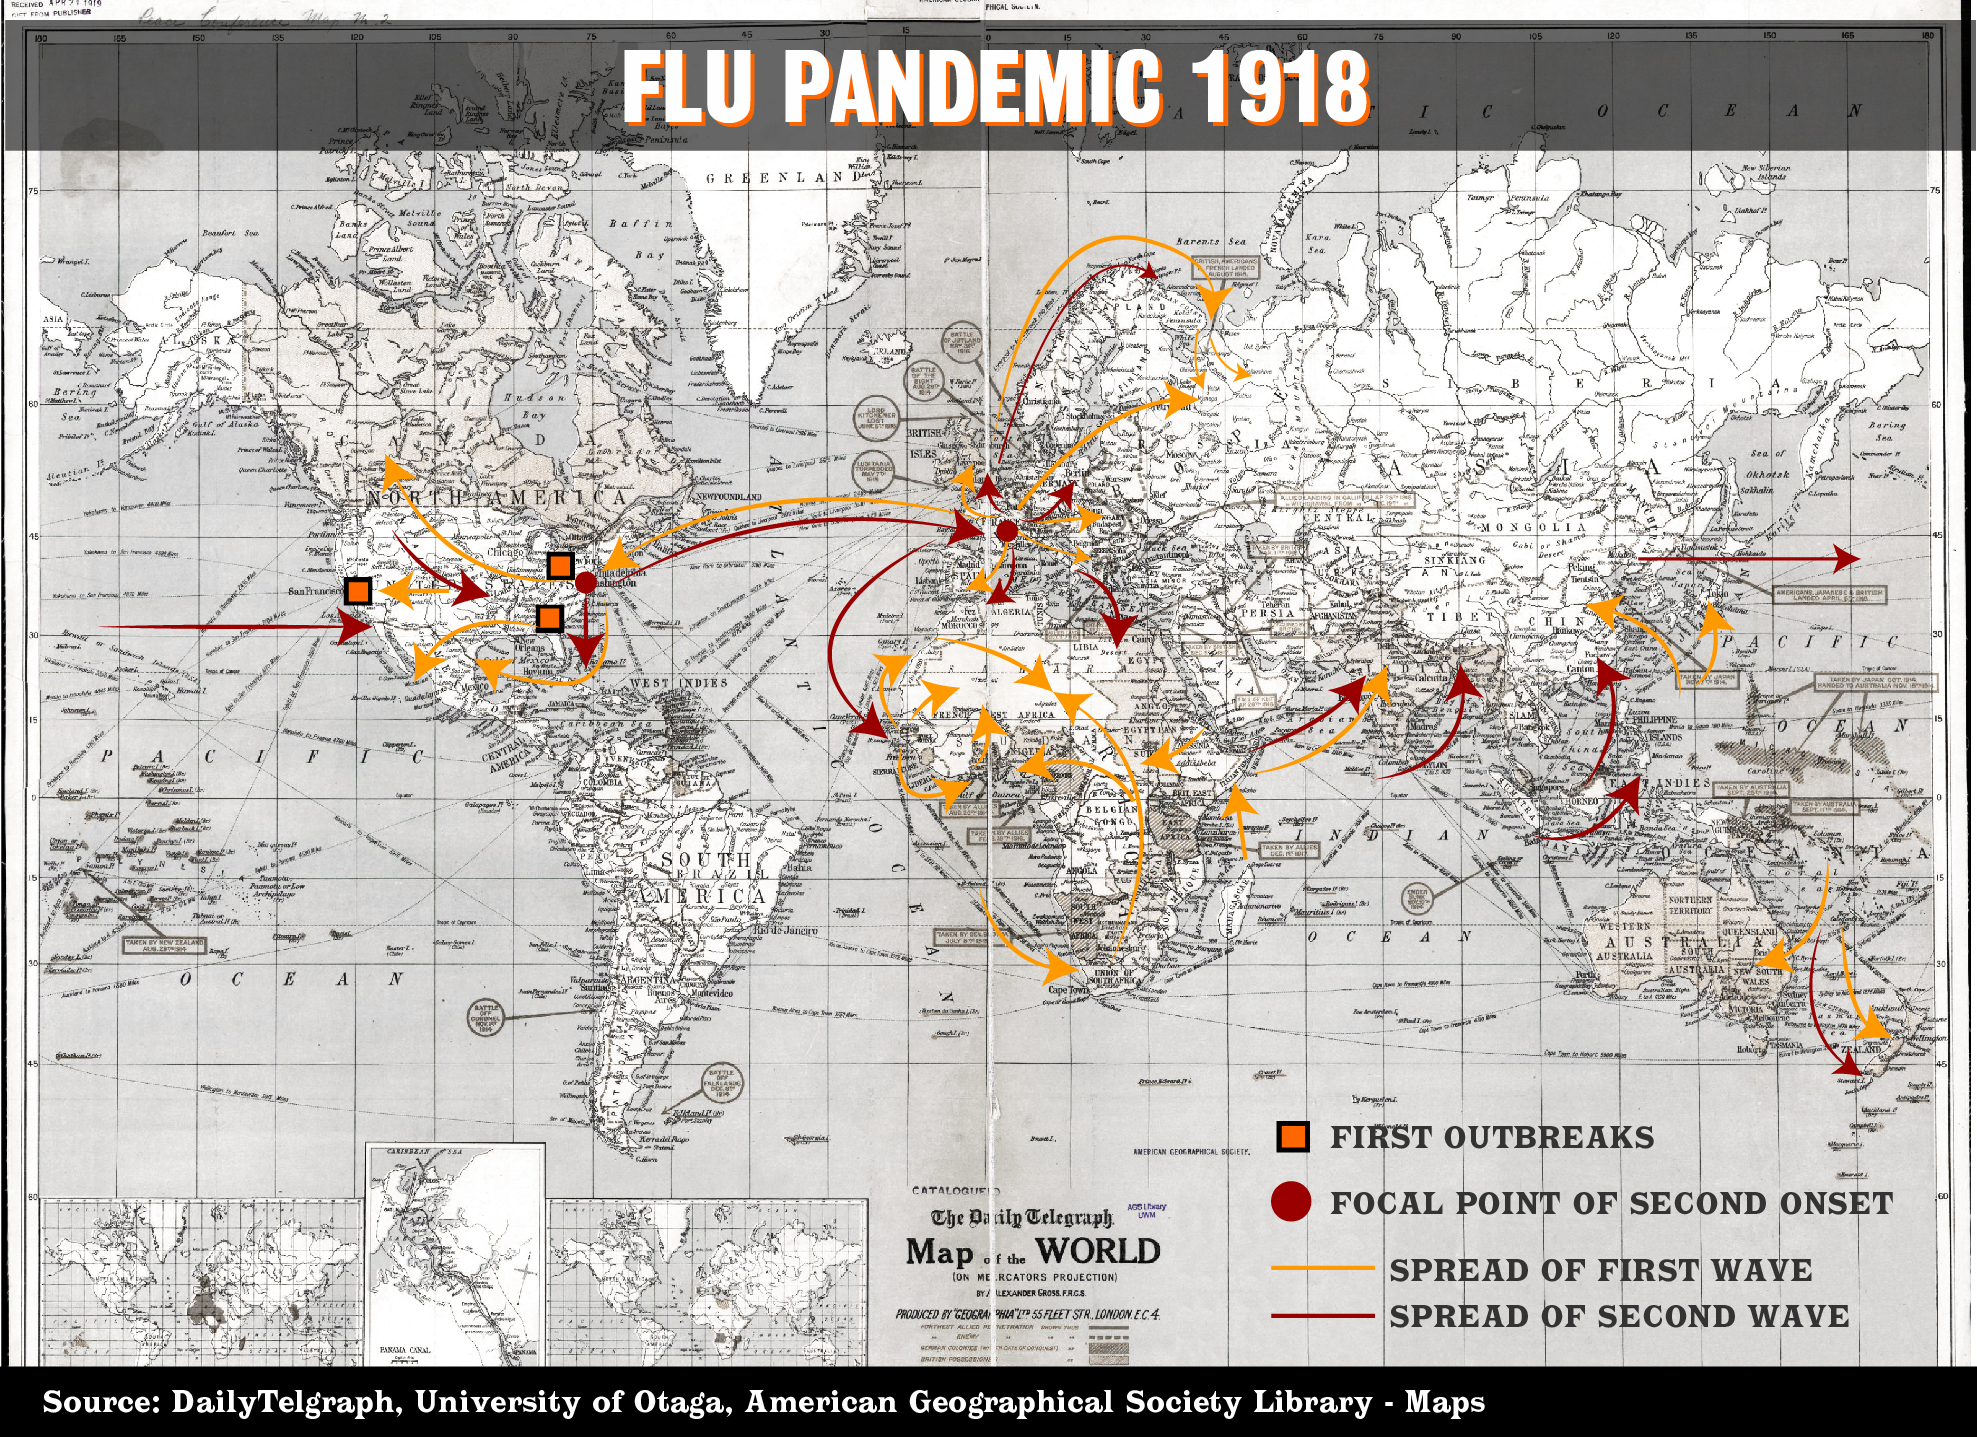 DO NOT USE: INTERACTIVE: Flu pandemic 1918 map